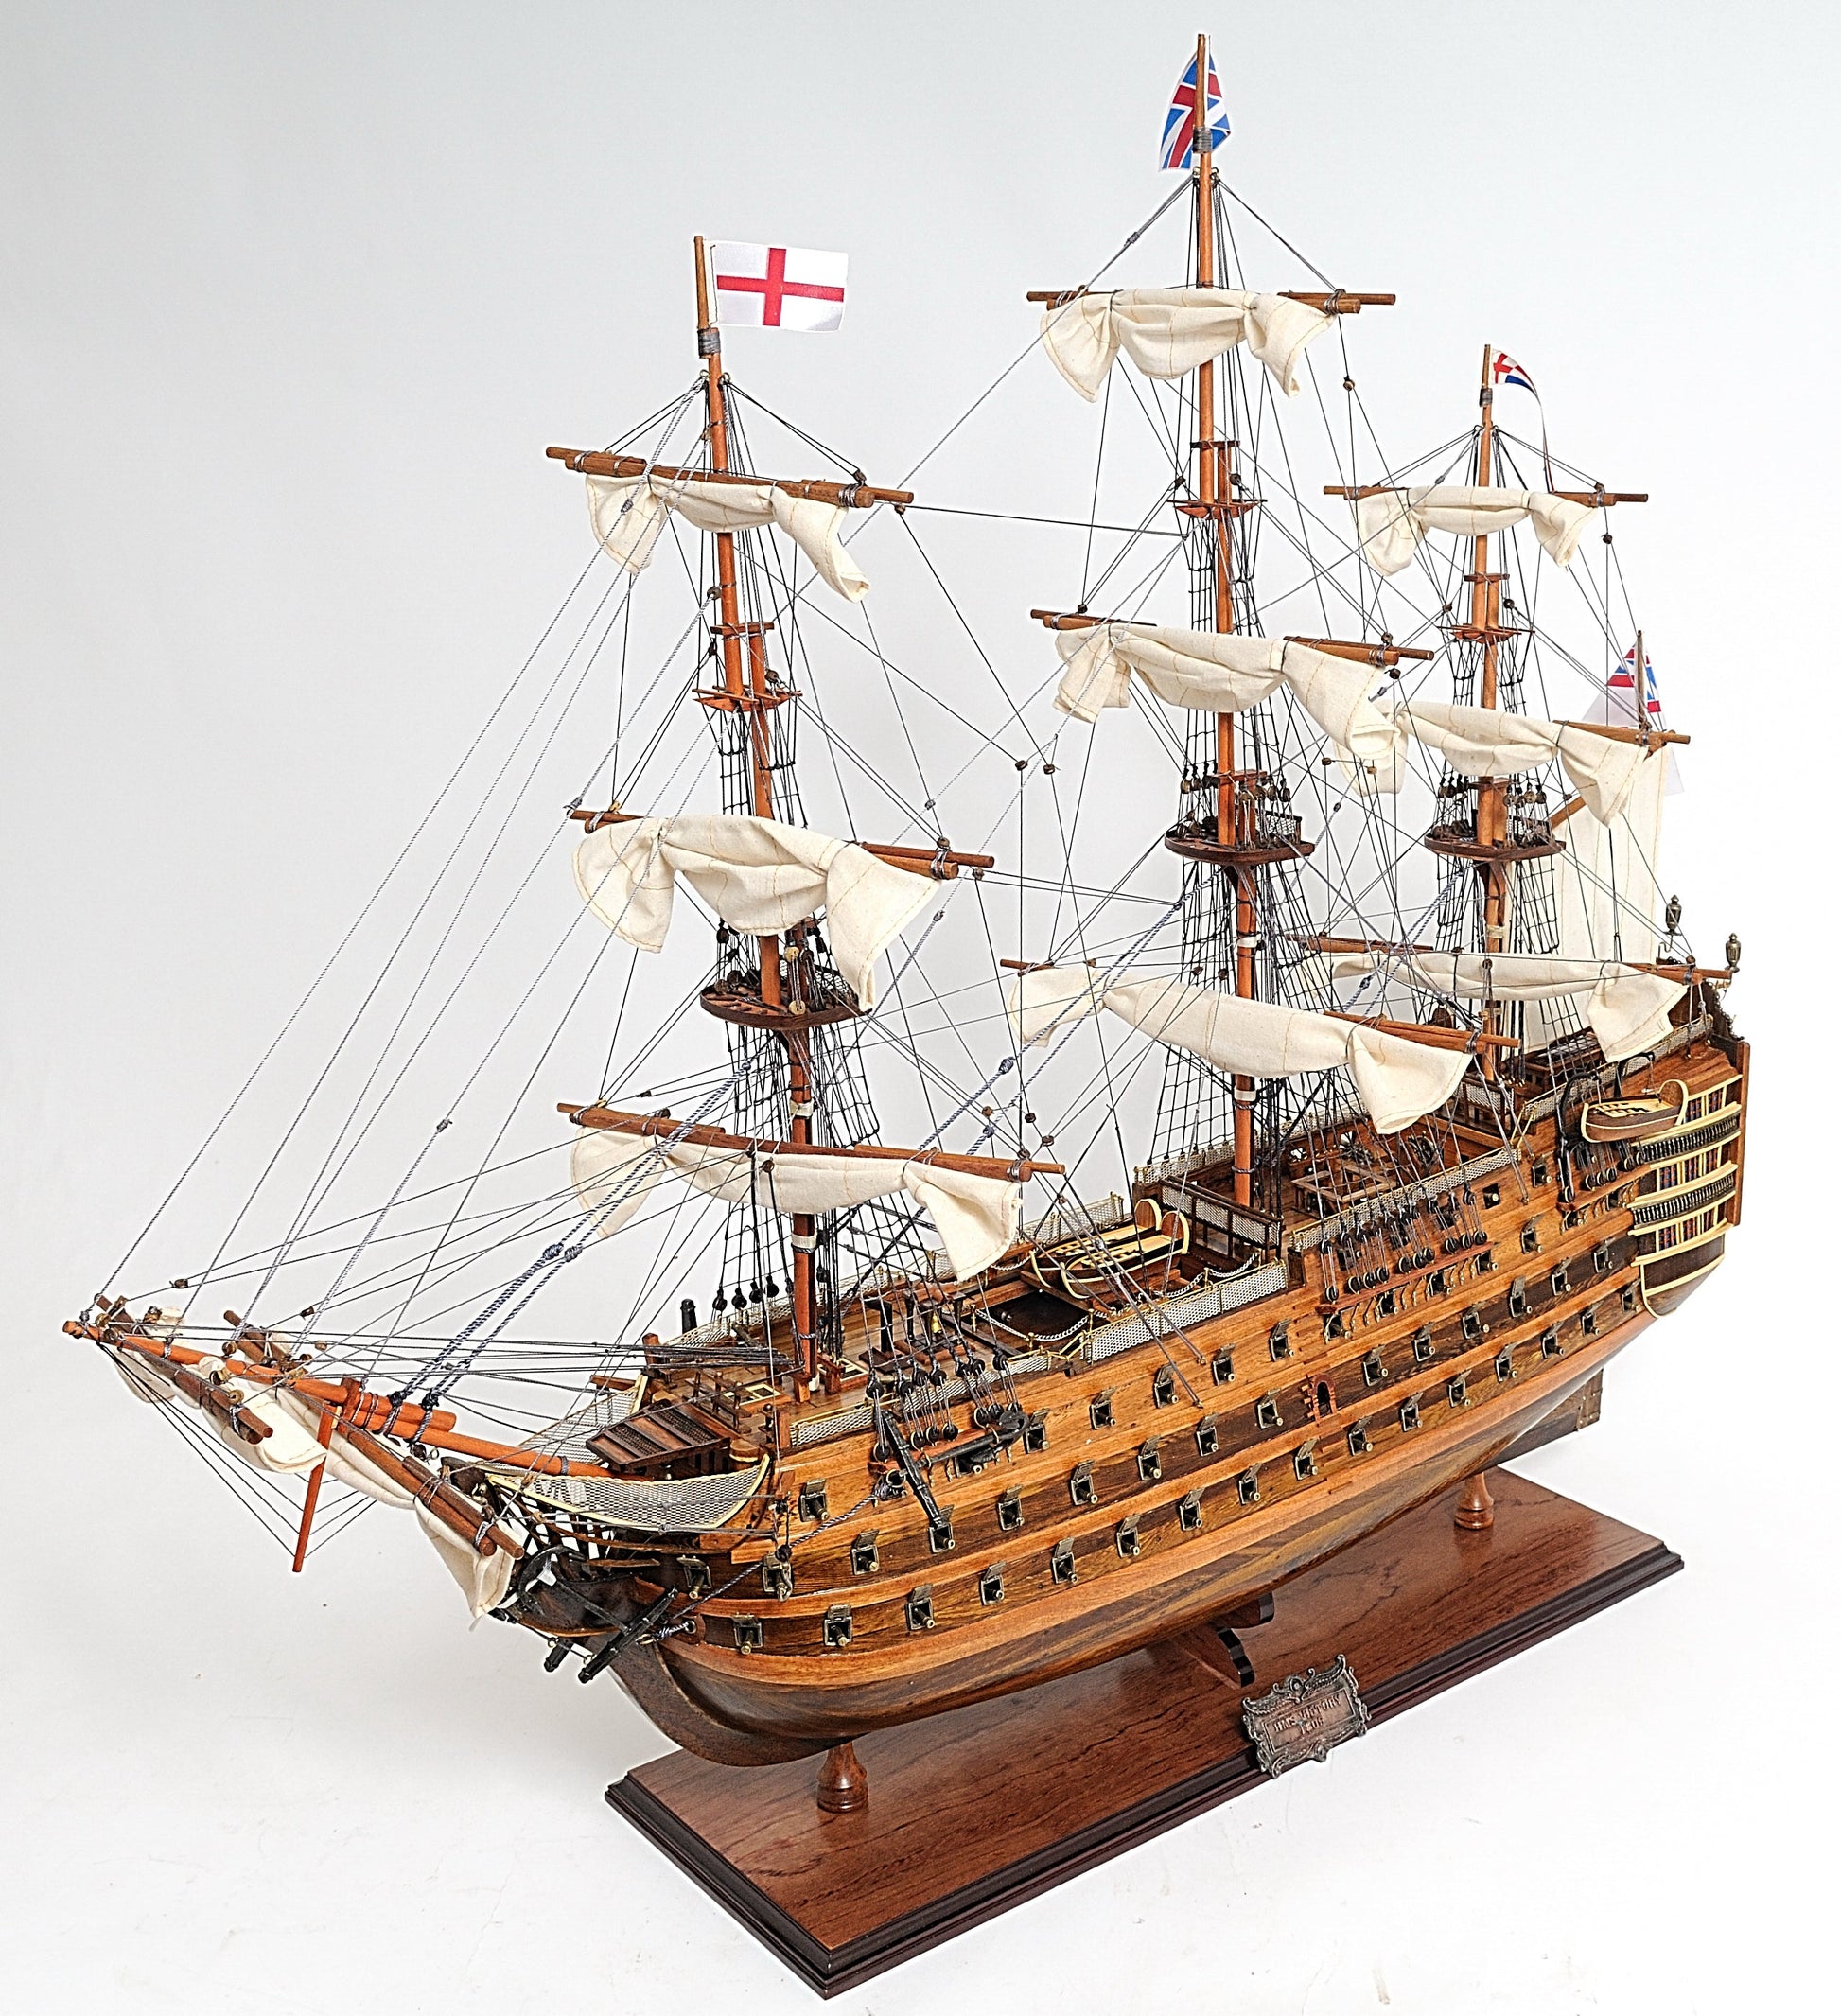 ALDO Hobbies & Creative Arts> Collectibles> Scale Model HMS Victory Admiral Nelsons Flagship Tall Ship Midsize EE Wood Model Sailboat Assembled